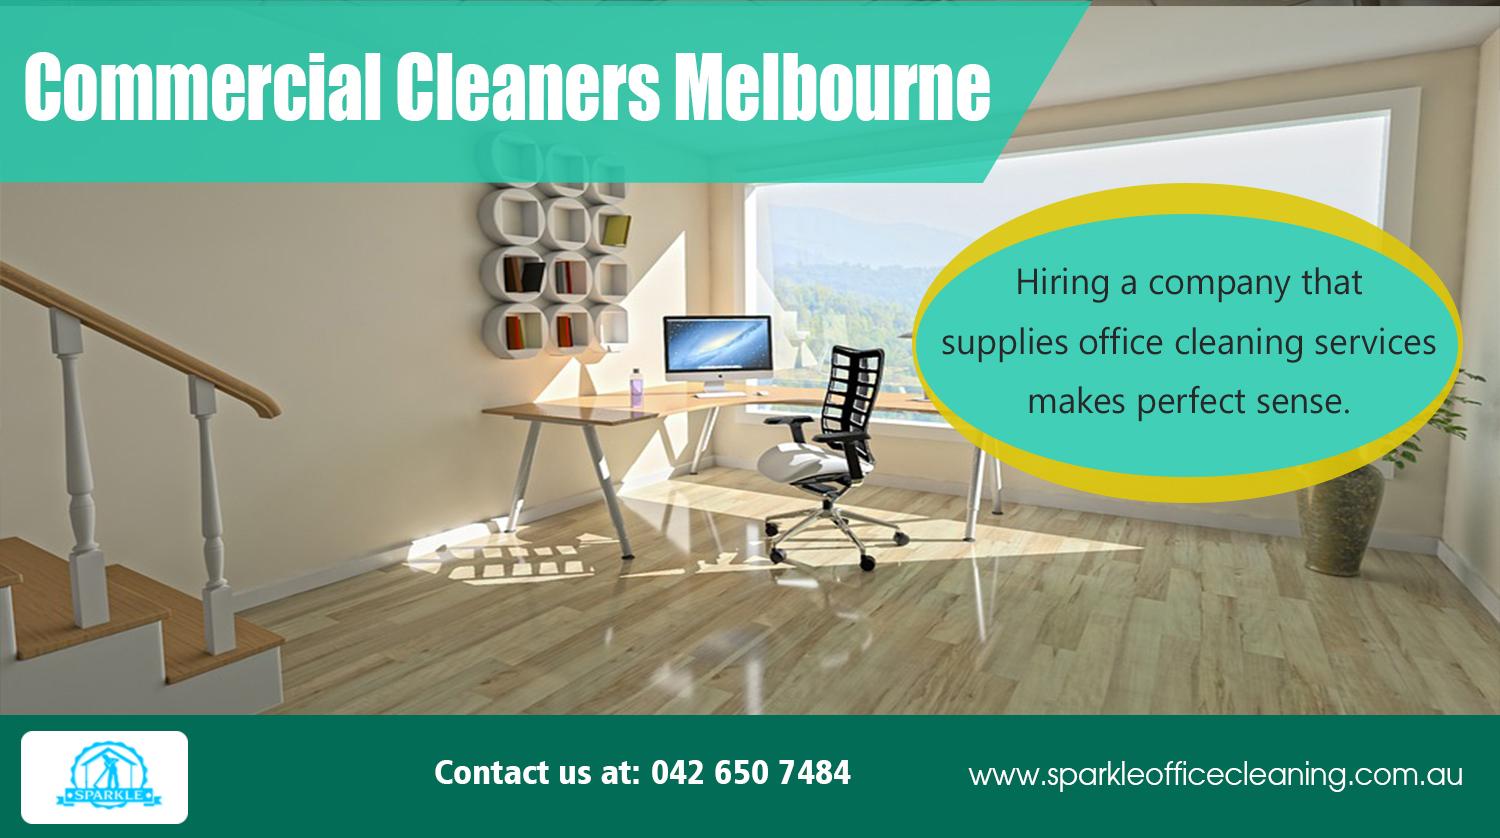 Commercial Cleaners in Melbourne | sparkleofficecleaning.com.au